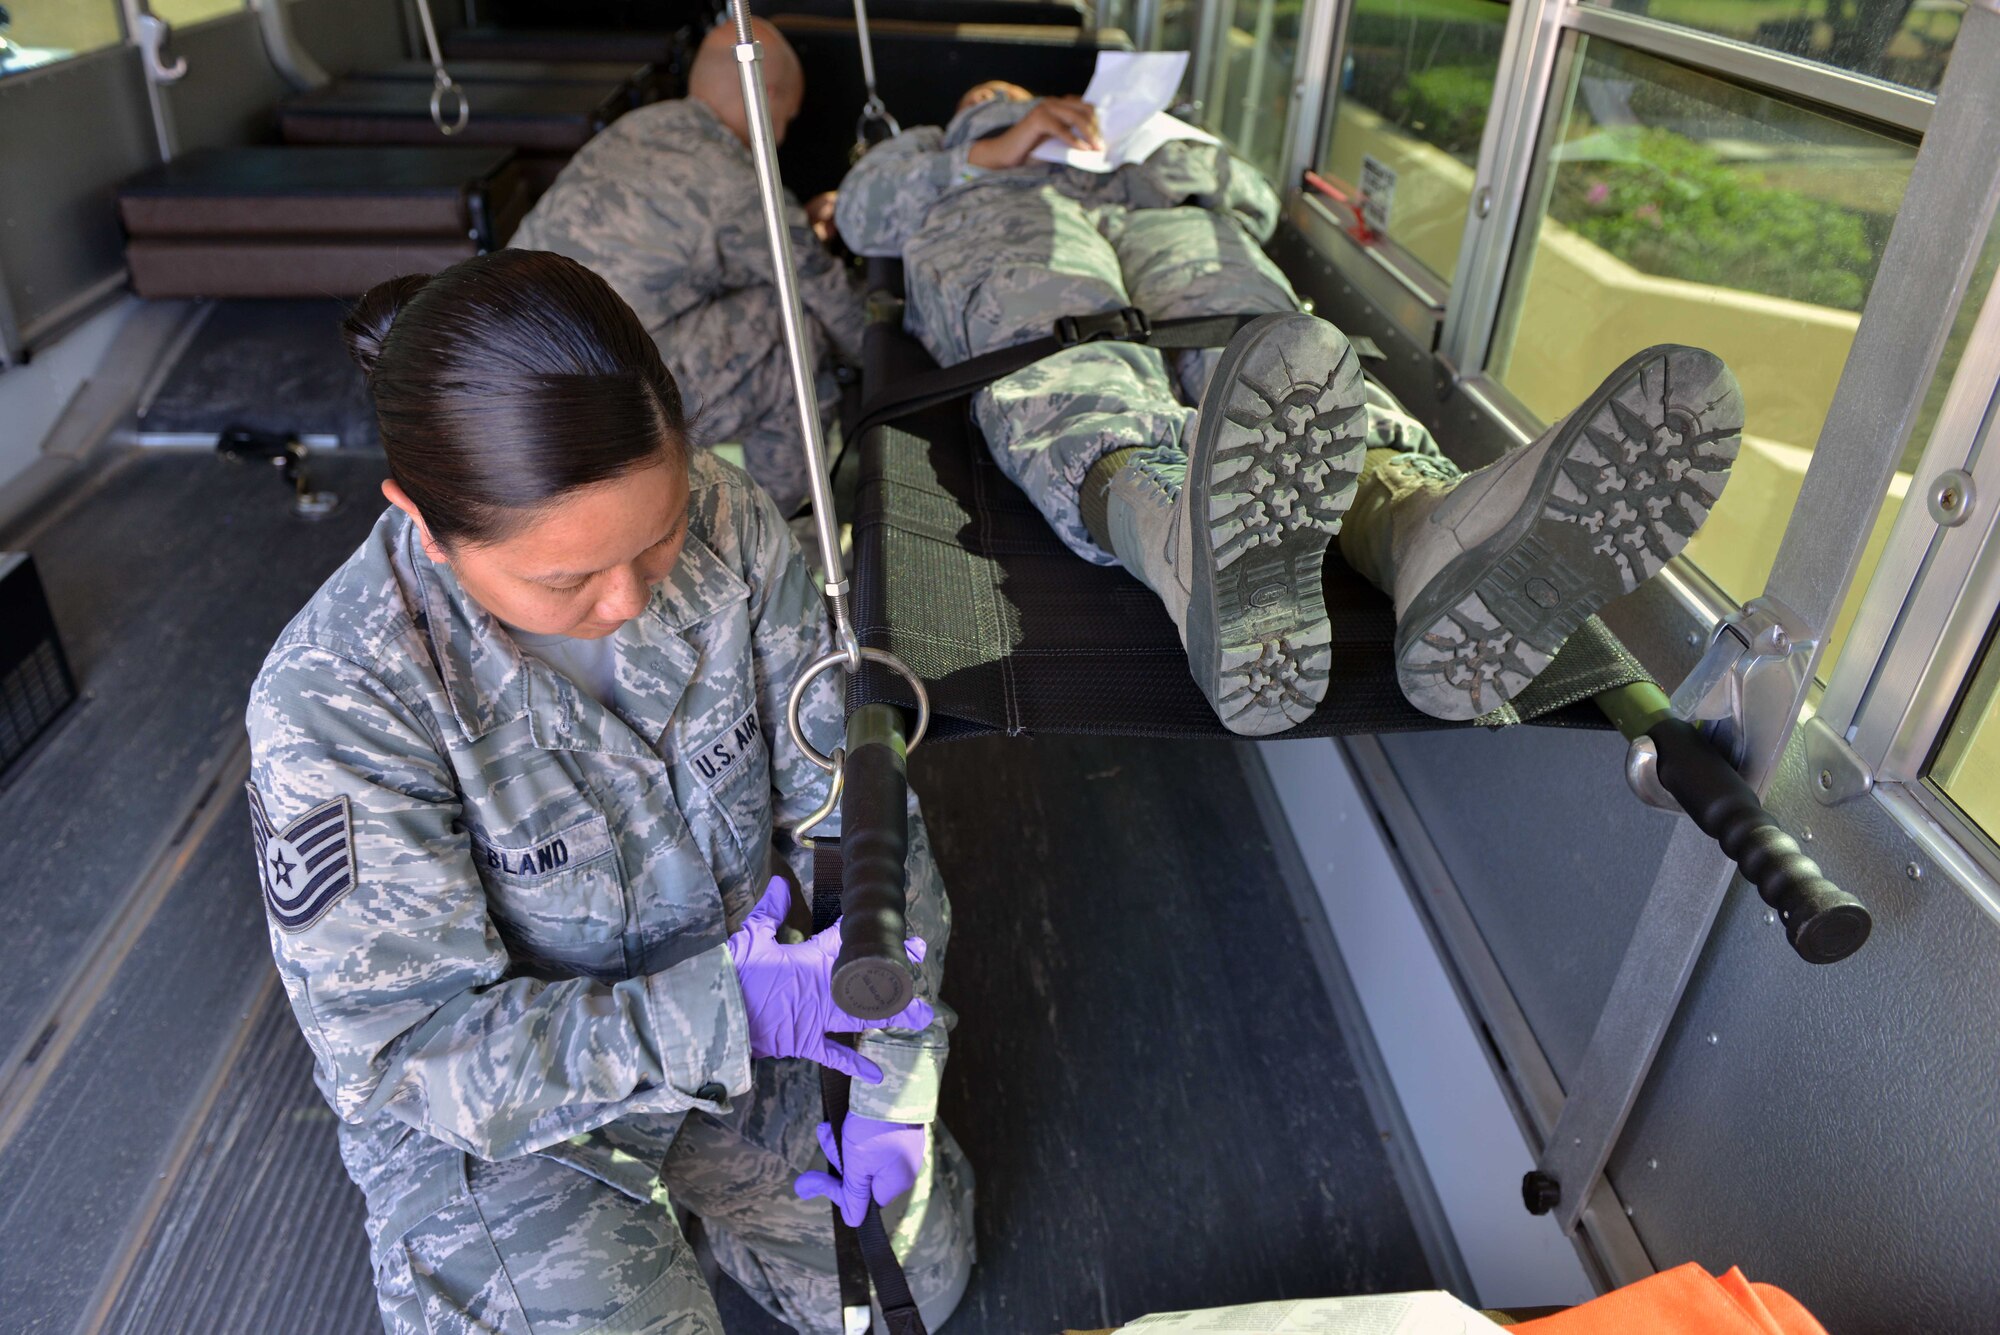 U.S. Air Force Tech. Sgt. Marinelle Bland, 39th Medical Operations Squadron medical admin, secures a simulated victim in a transportation vehicle during a mass casualty exercise Sept. 21, 2016, at Incirlik Air Base, Turkey. Airmen from the 39th Medical Group were tasked with responding to mass casualty scenarios and treating simulated injured personnel. (U.S. Air Force photo by Senior Airman John Nieves Camacho)